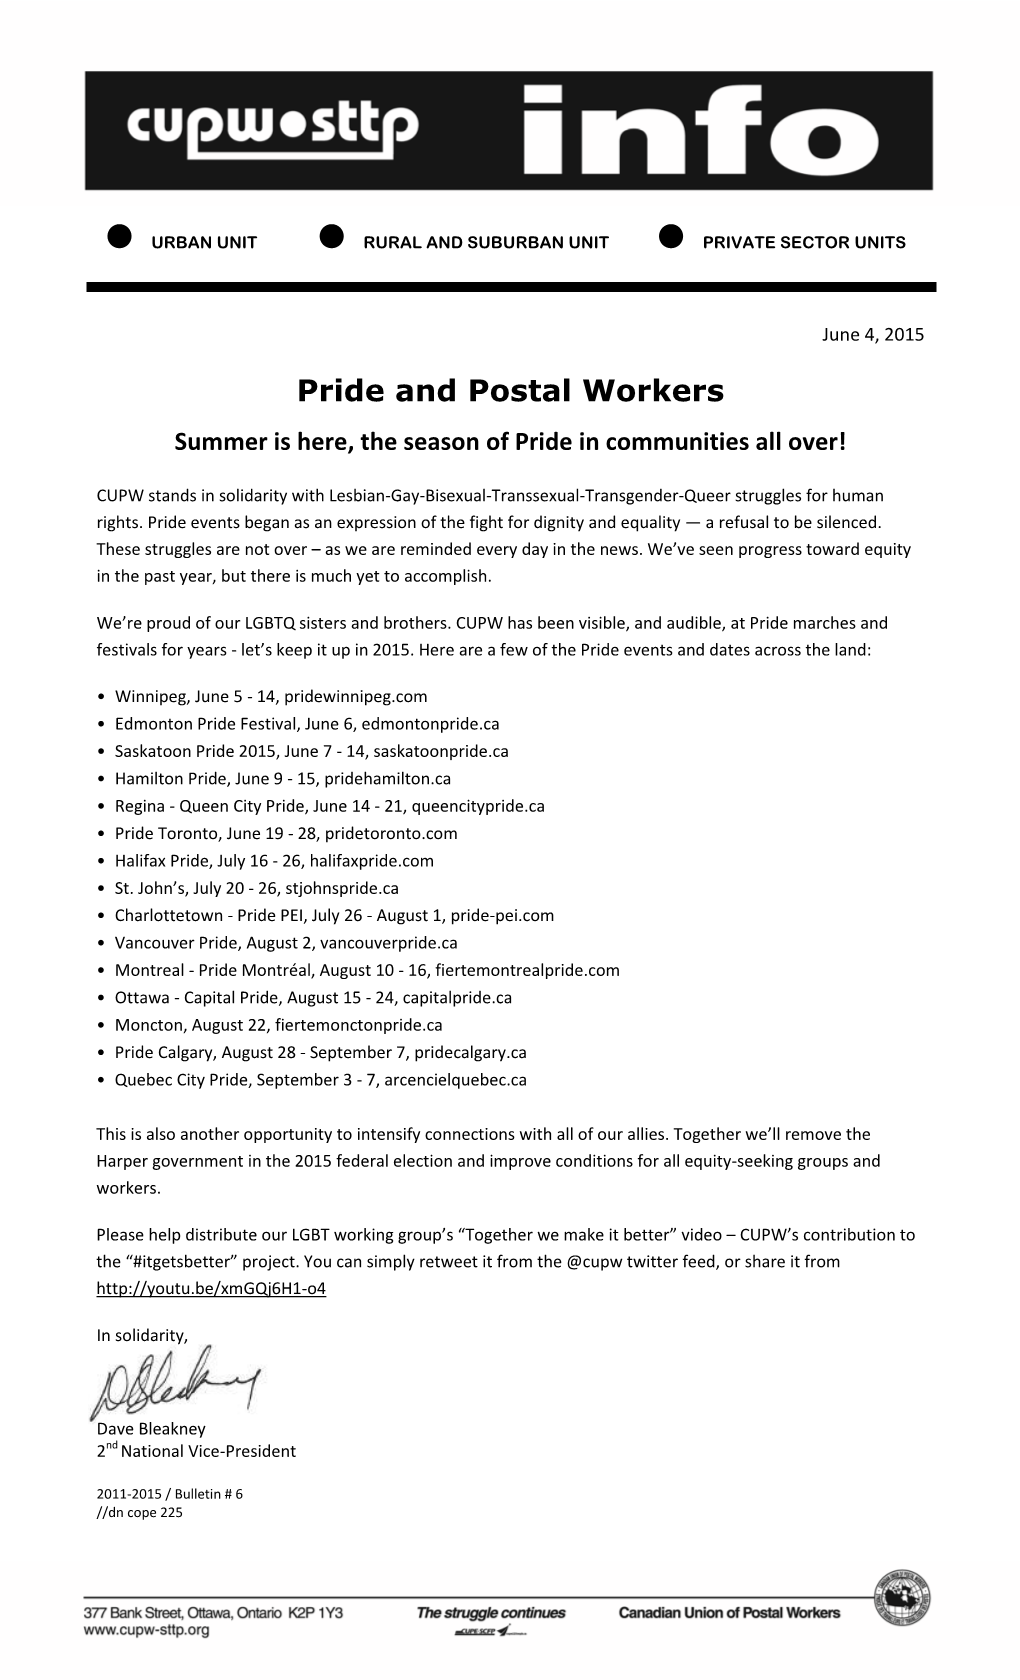 Pride and Postal Workers Summer Is Here, the Season of Pride in Communities All Over!